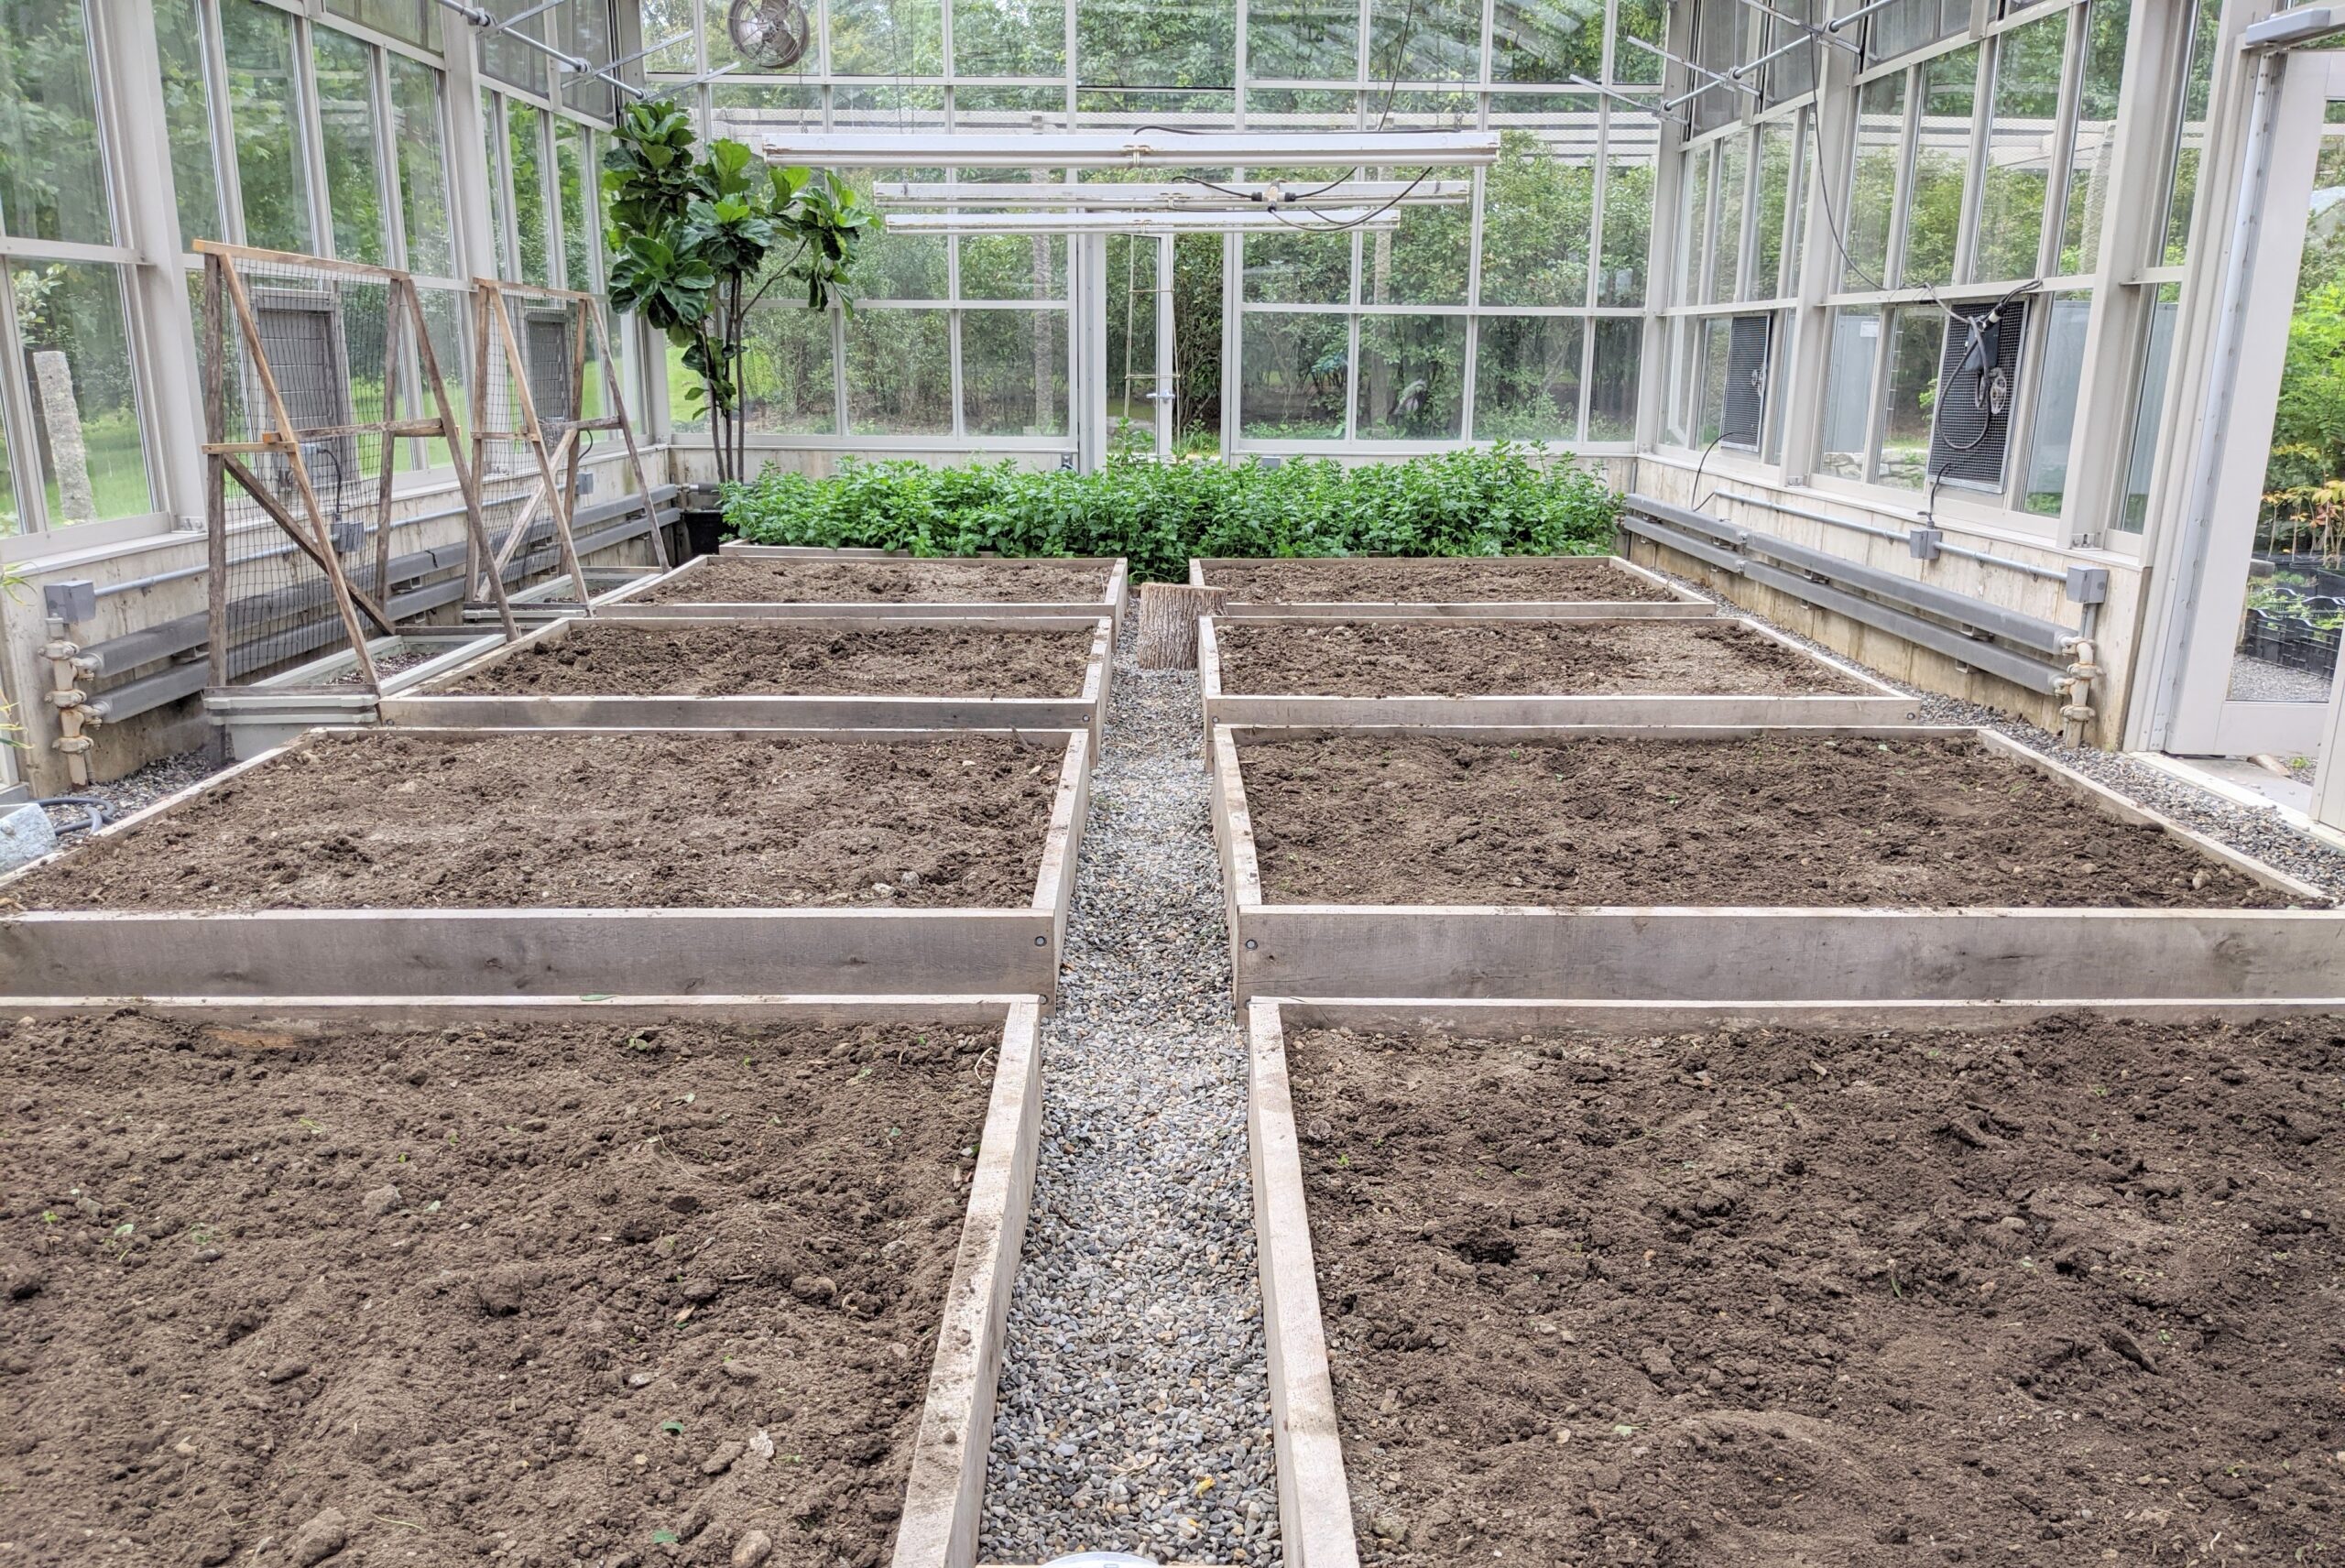 Vegetable Greenhouse Beds For Planting